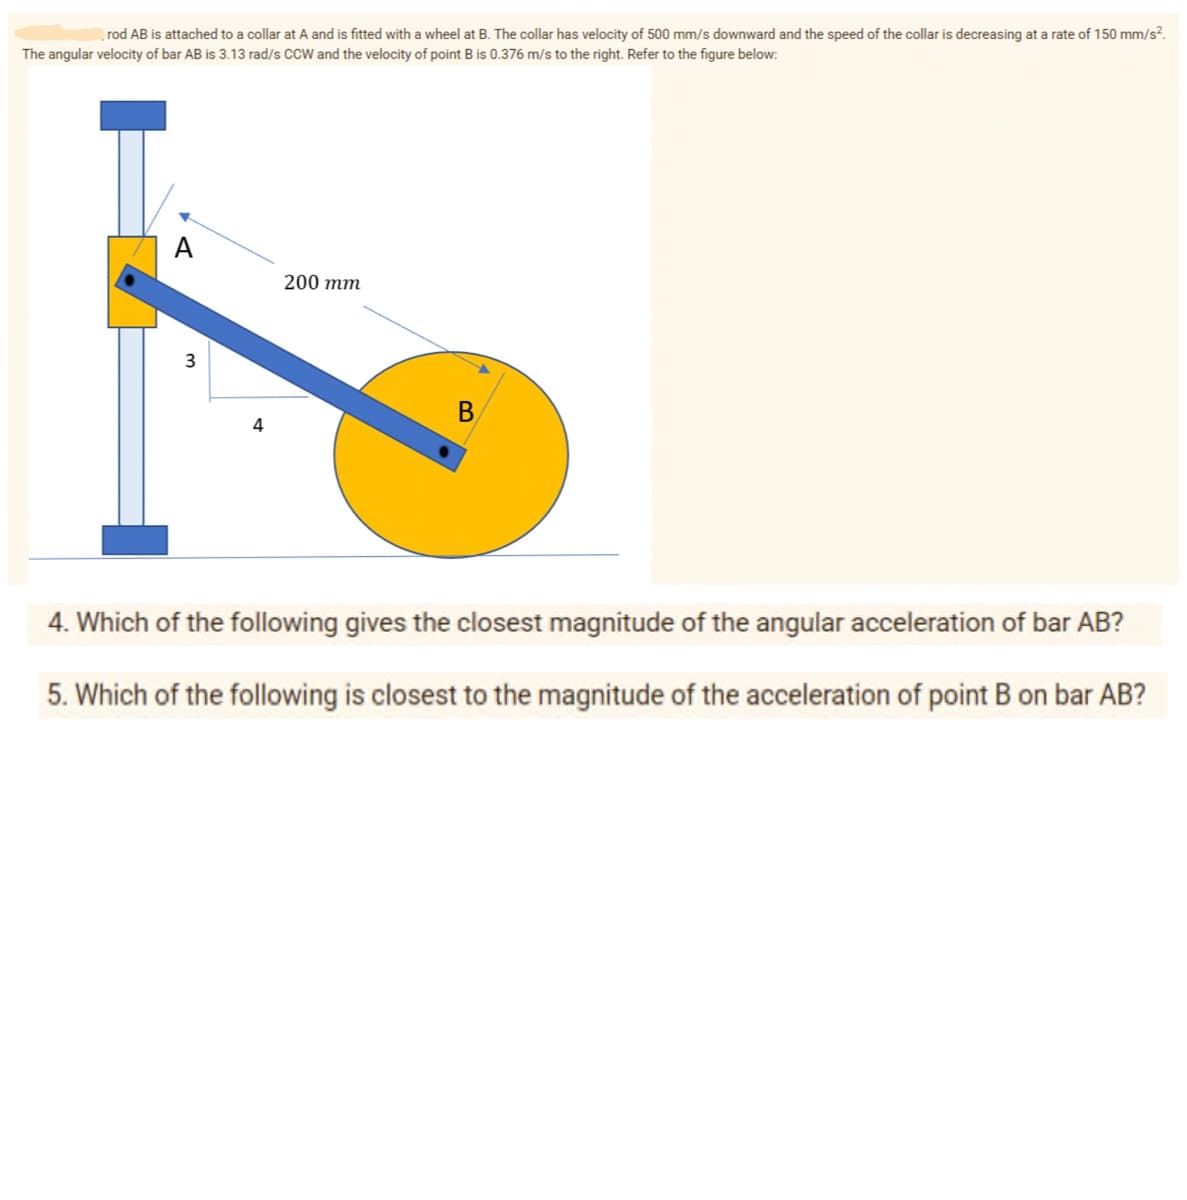 rod AB is attached to a collar at A and is fitted with a wheel at B. The collar has velocity of 500 mm/s downward and the speed of the collar is decreasing at a rate of 150 mm/s².
The angular velocity of bar AB is 3.13 rad/s CCW and the velocity of point B is 0.376 m/s to the right. Refer to the figure below:
A
200 тm
3
В
4
4. Which of the following gives the closest magnitude of the angular acceleration of bar AB?
5. Which of the following is closest to the magnitude of the acceleration of point B on bar AB?
